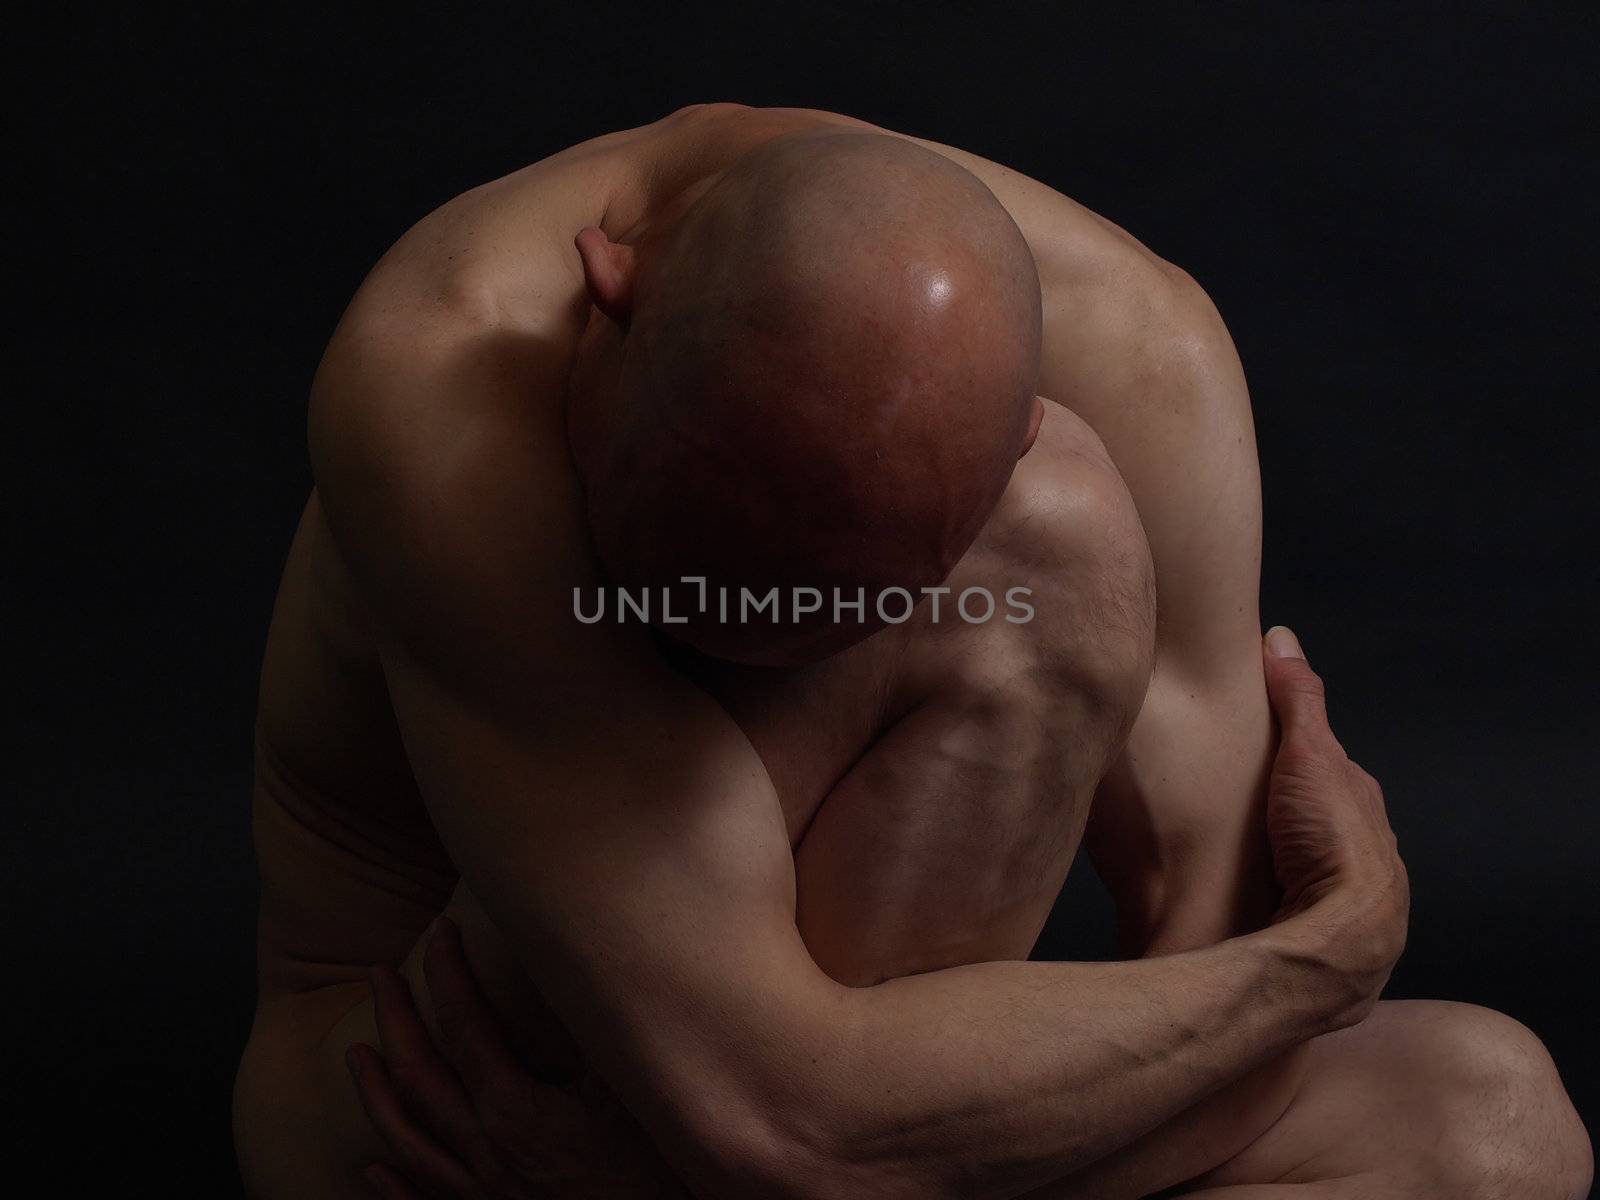 A clean shaven nude male sits in darkness, crumpled up. Over a black background.